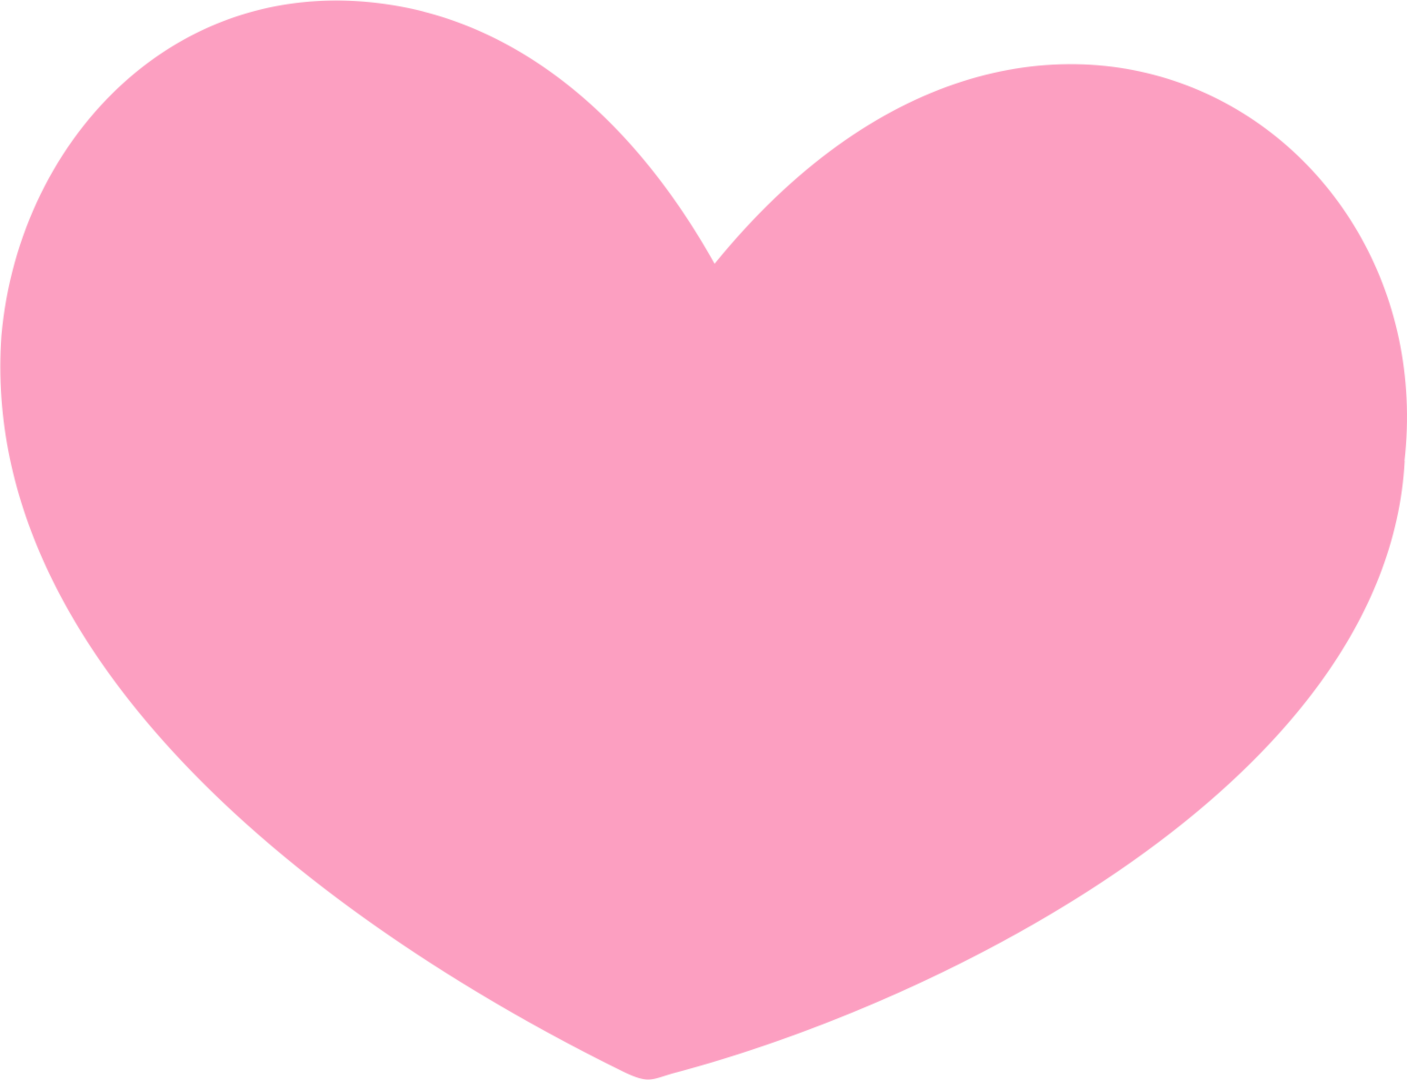 Free Pink Heart Png Download Free Pink Heart Png Png Images Free Cliparts On Clipart Library 